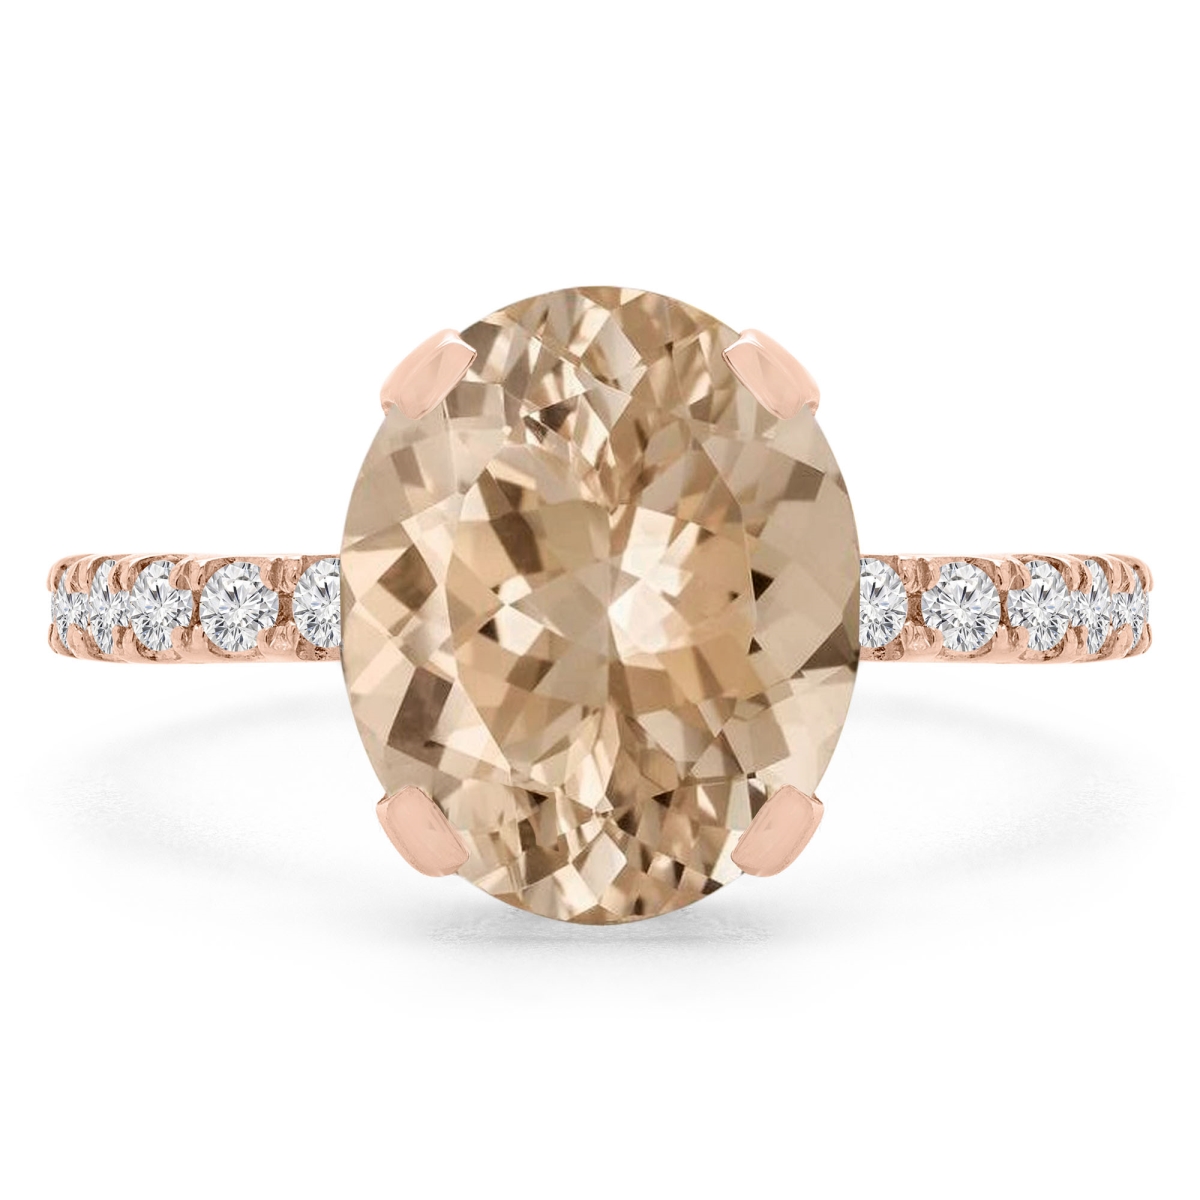 Picture of Majesty Diamonds MD190407-5.5 3.4 CTW Oval Pink Morganite Under Halo Engagement Ring in 14K Rose Gold - Size 5.5